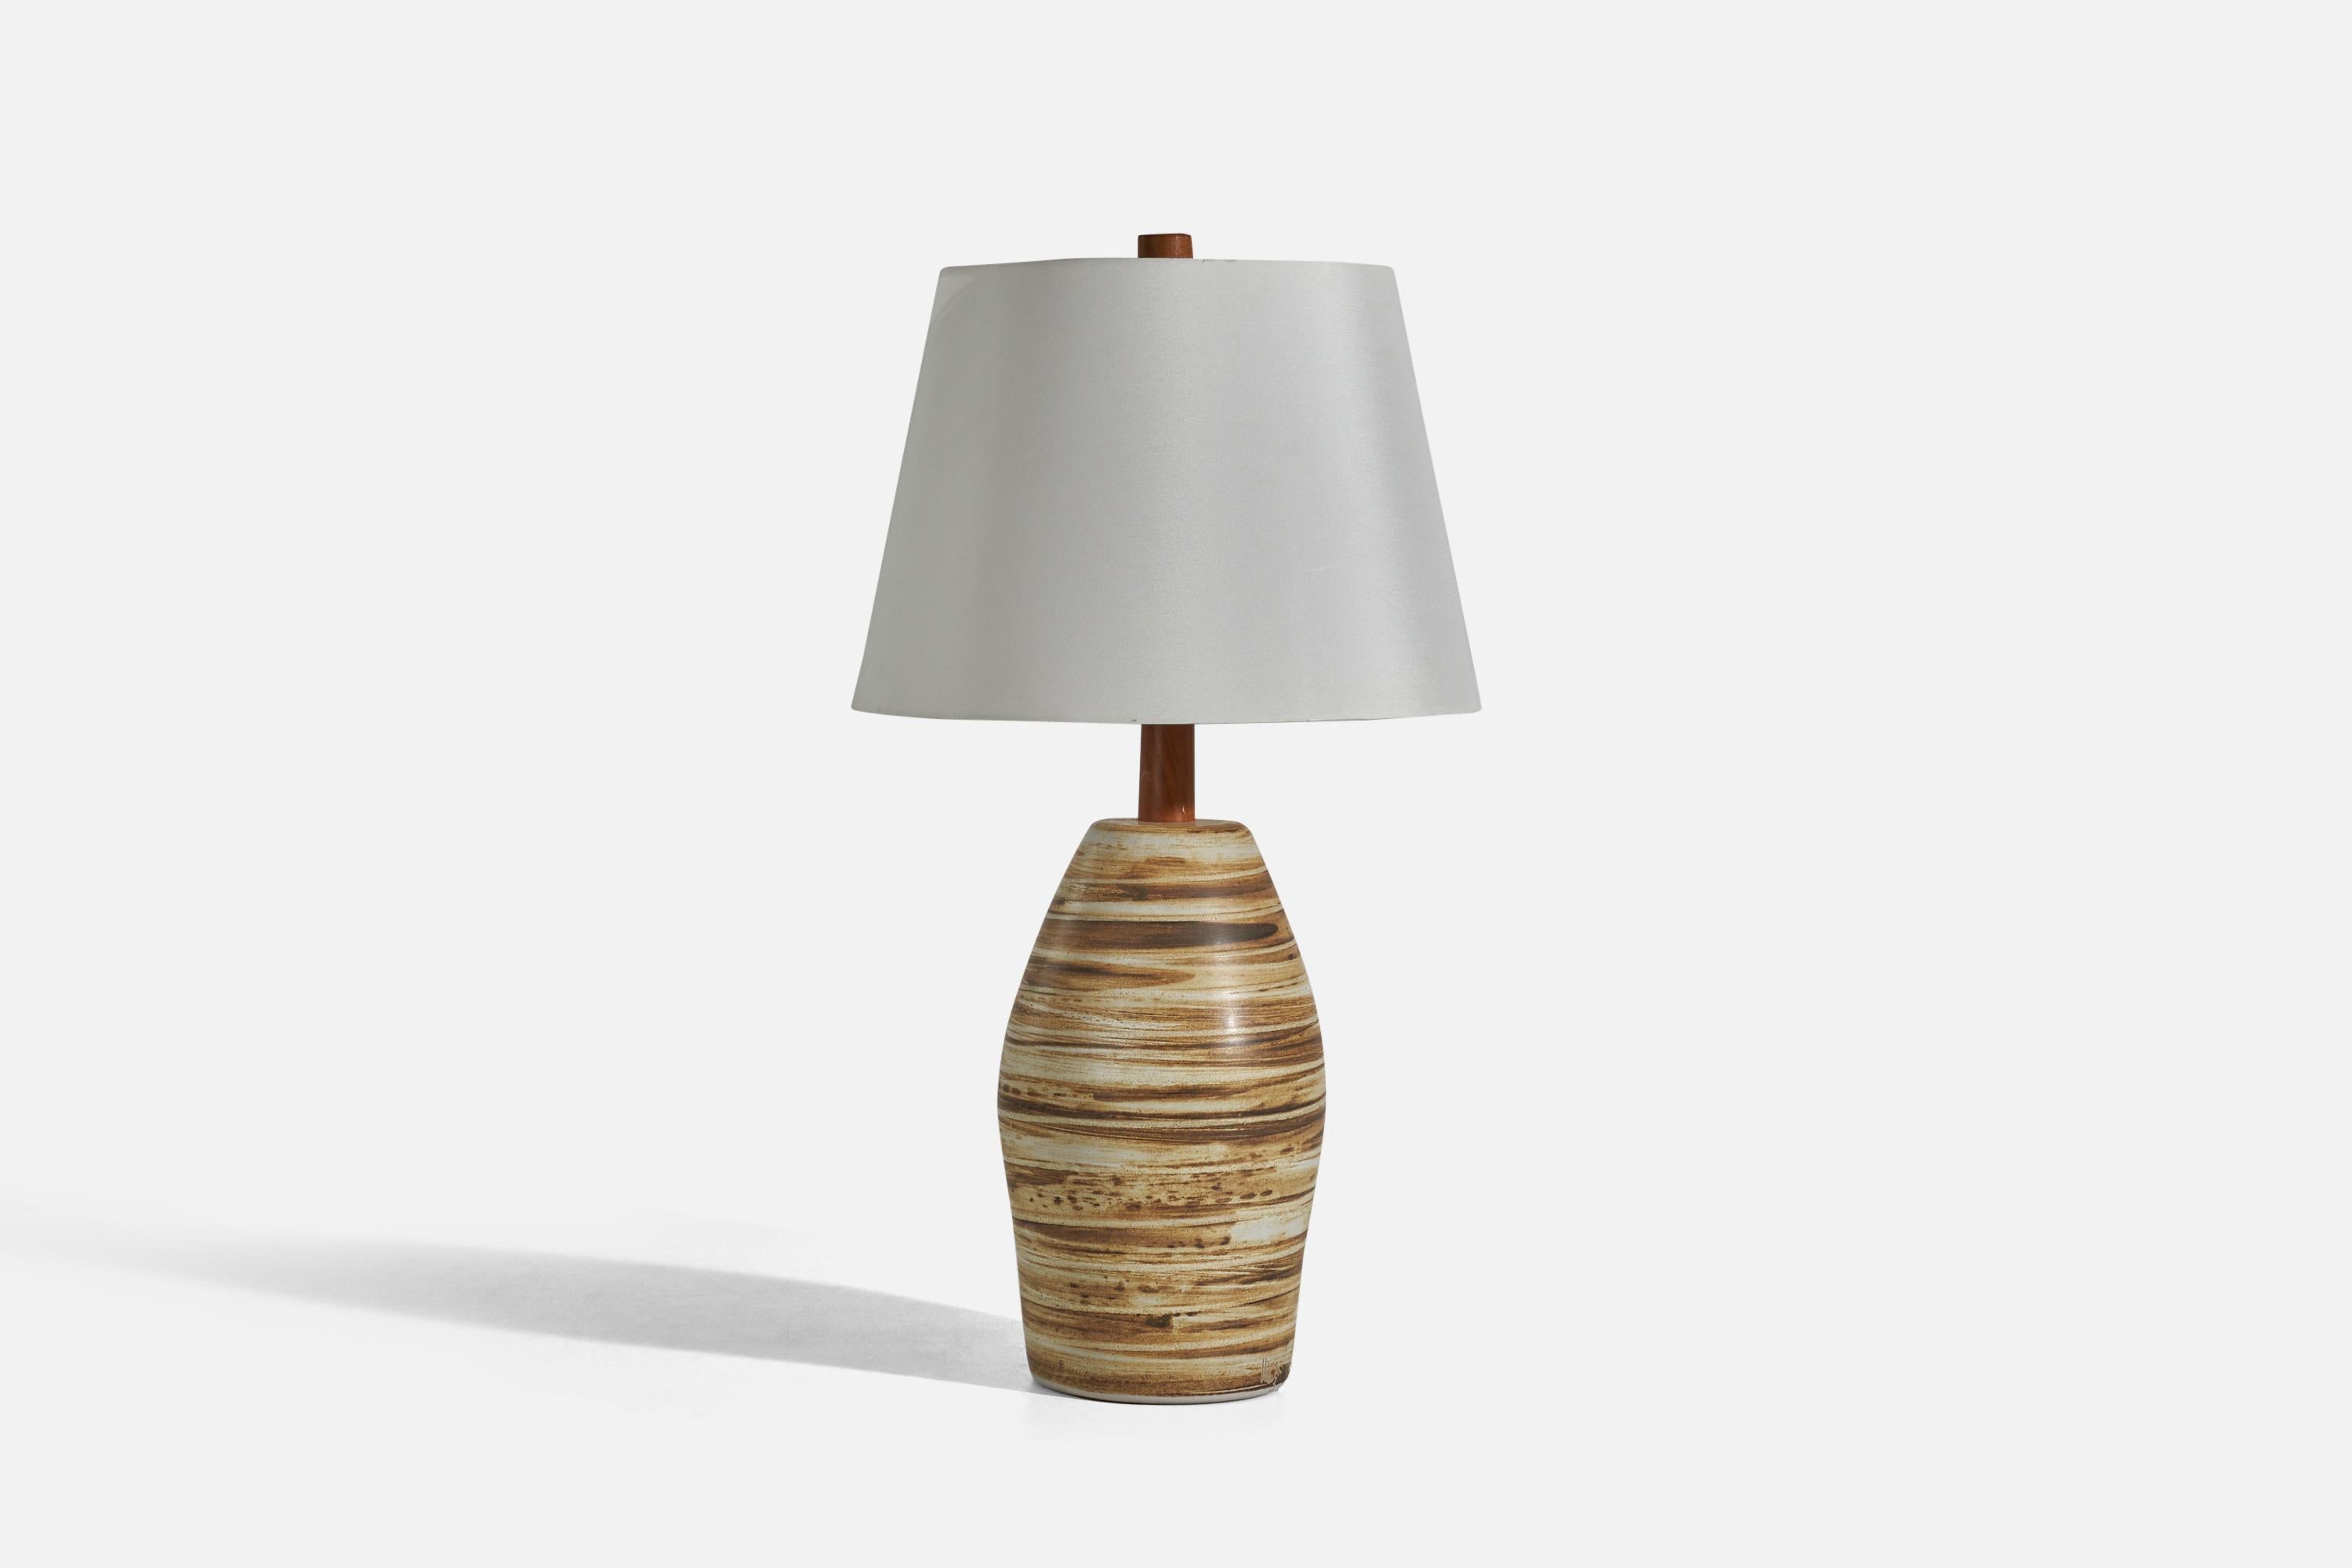 A pair of walnut and beige and brown hand-painted ceramic table lamps designed by Jane & Gordon Martz and produced by Marshall Studios, Indianapolis, c. 1960s. 

Sold without Lampshades.

Dimensions of Lamp (inches) : 18.37 x 7.37 x 7.37 (Height x